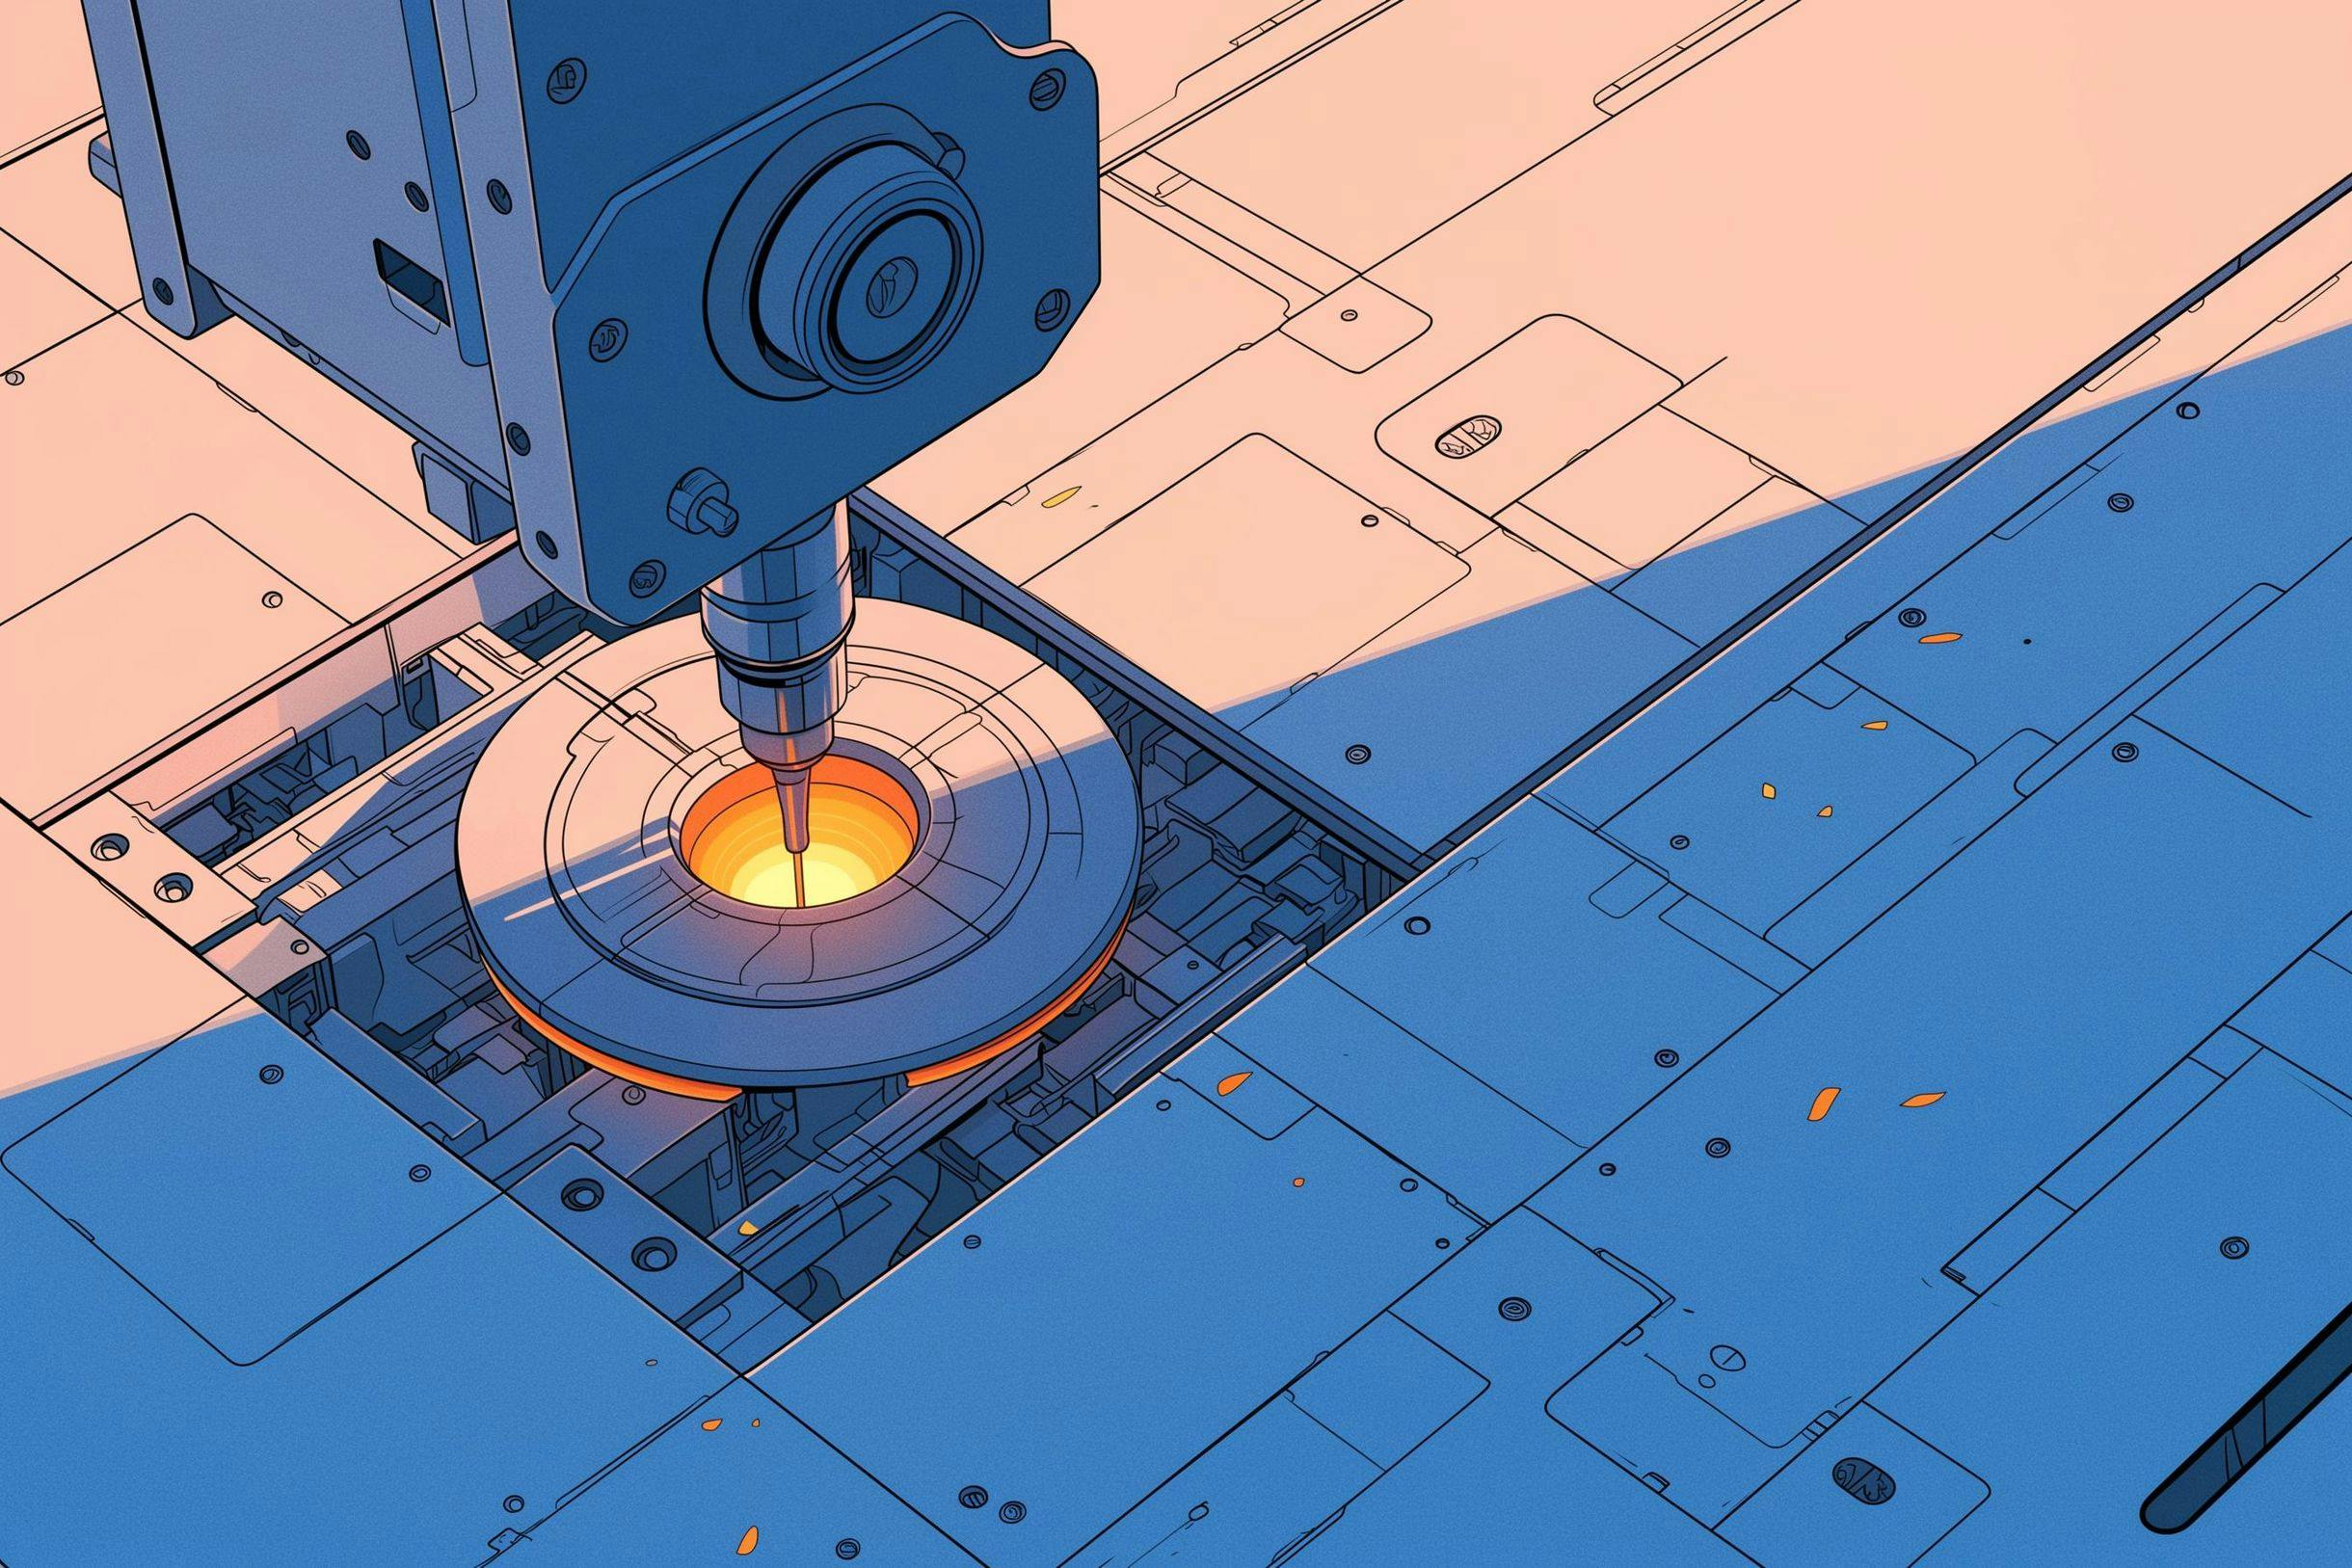 An illustration of a laser cutter crafting something unique